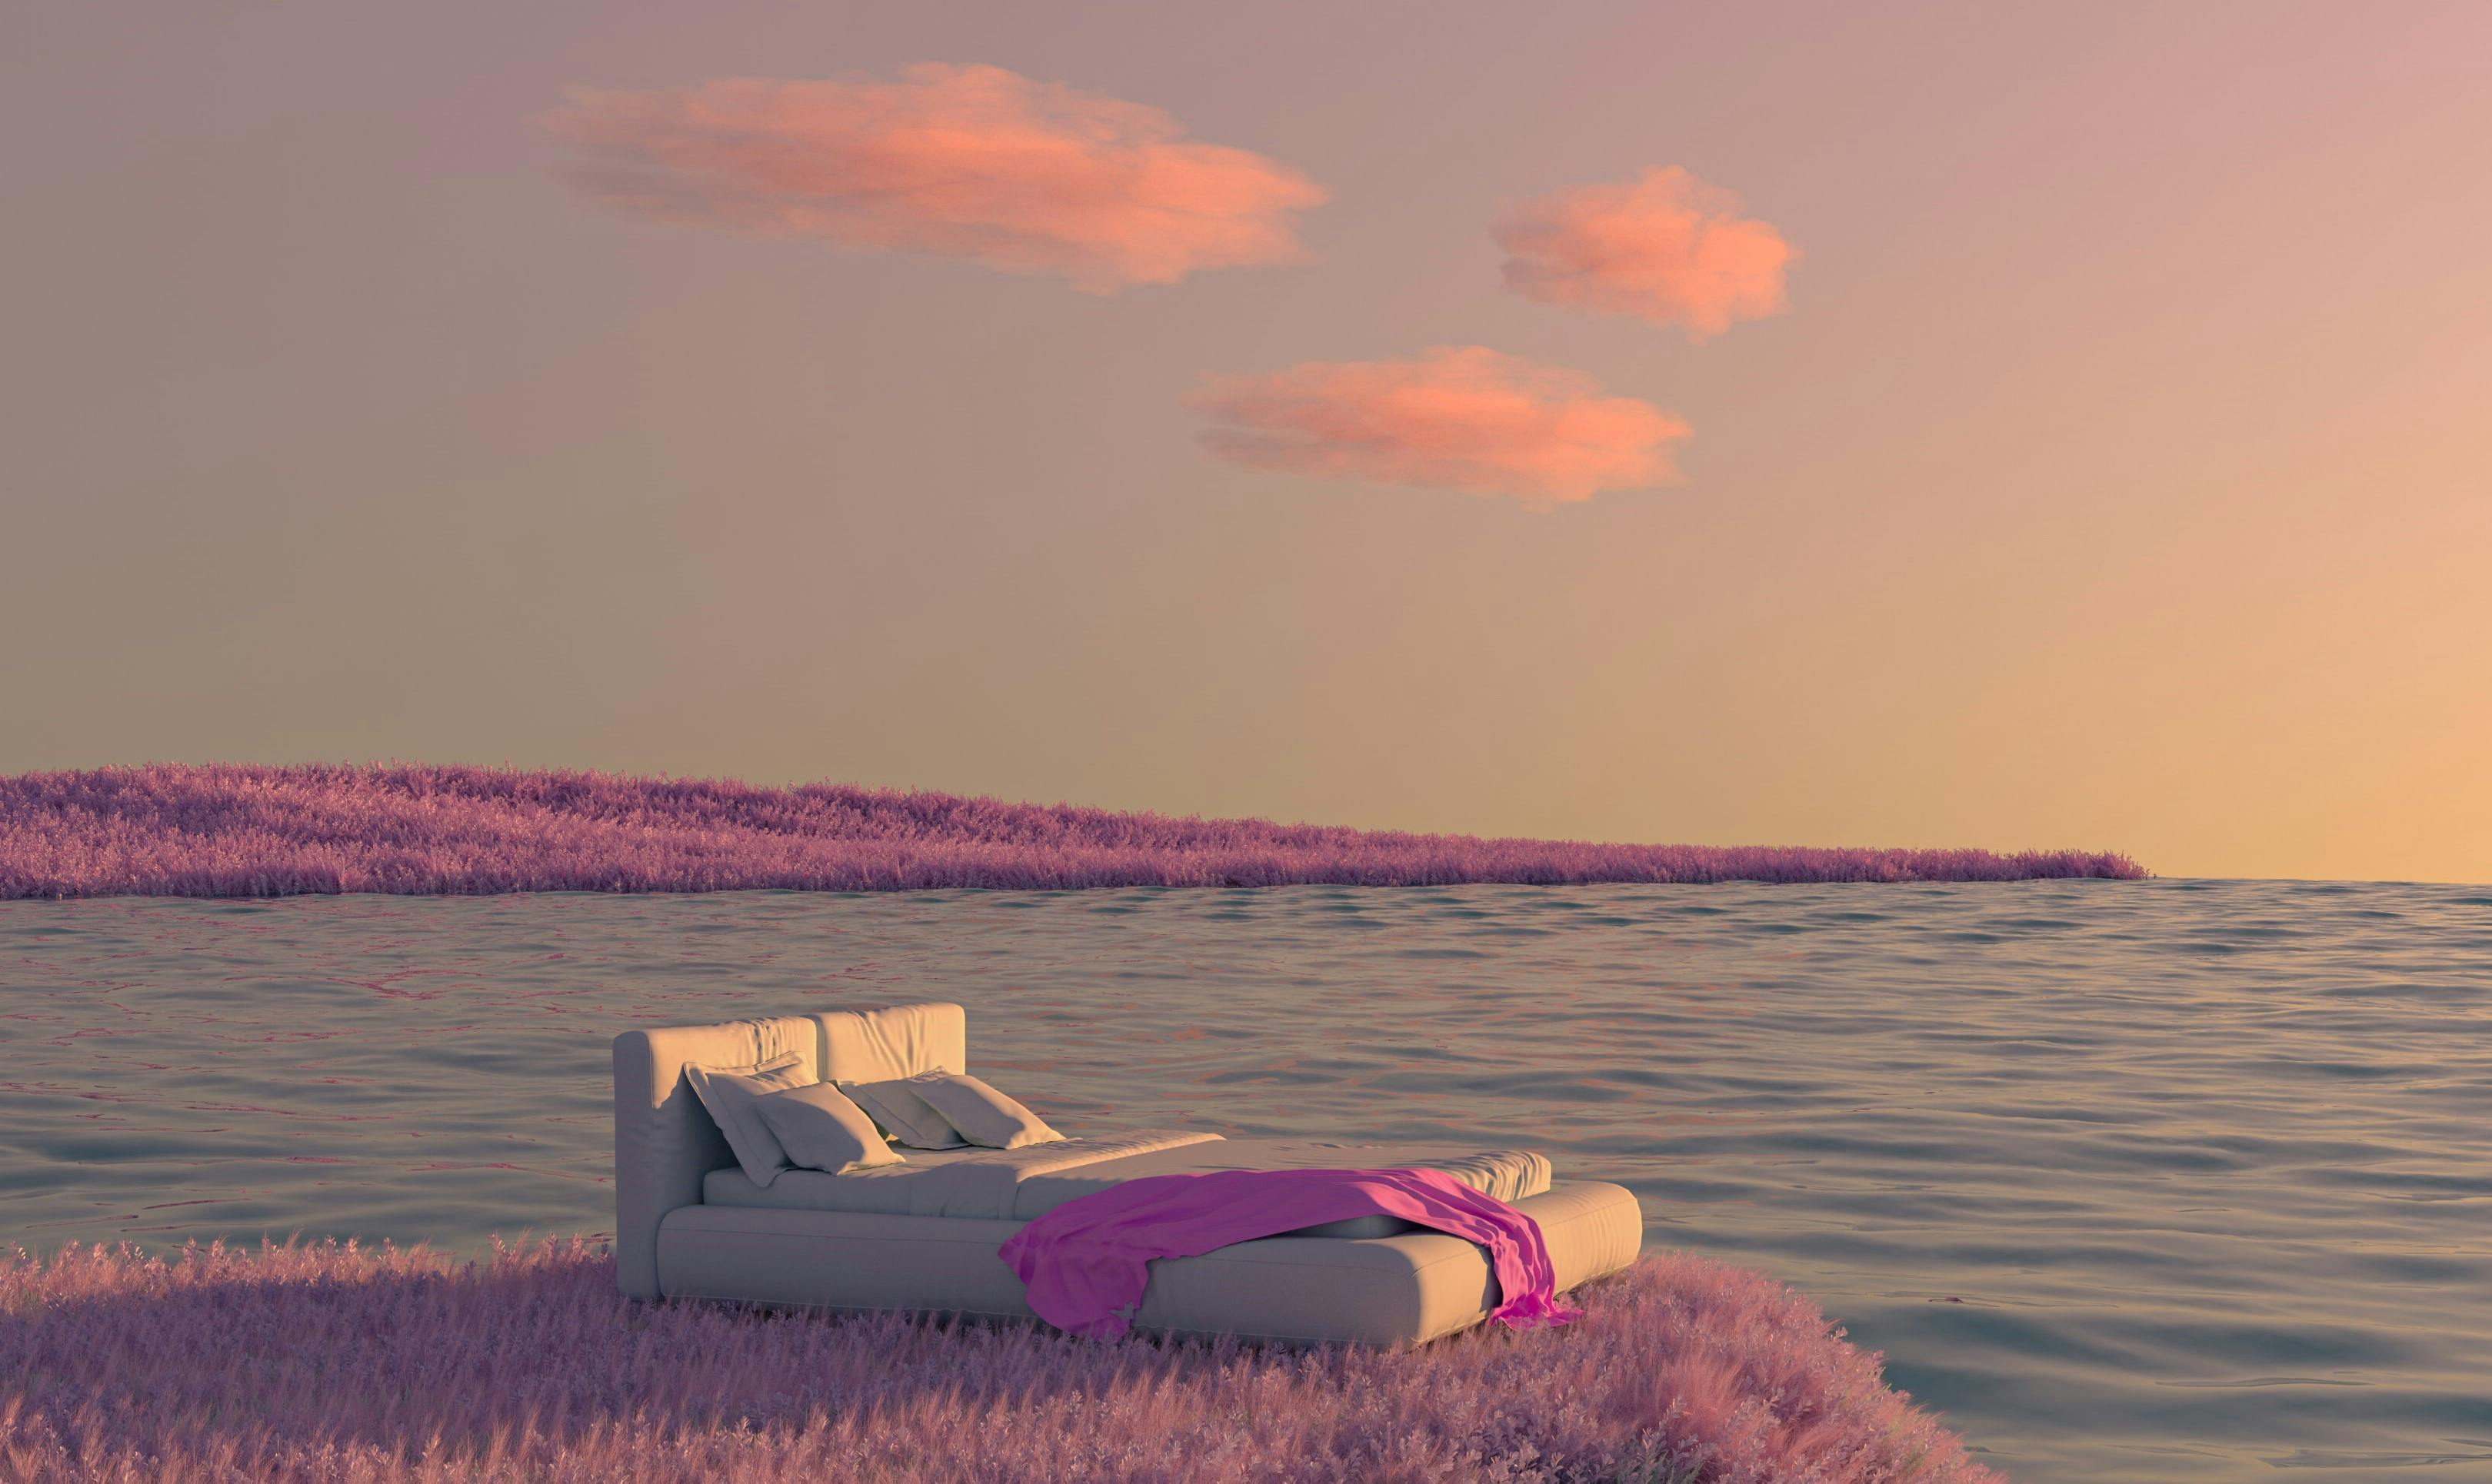 A photo of a digital world with no metaverse users. The world has a lake with islands of pink grass. There is an empty bed on the grass. 